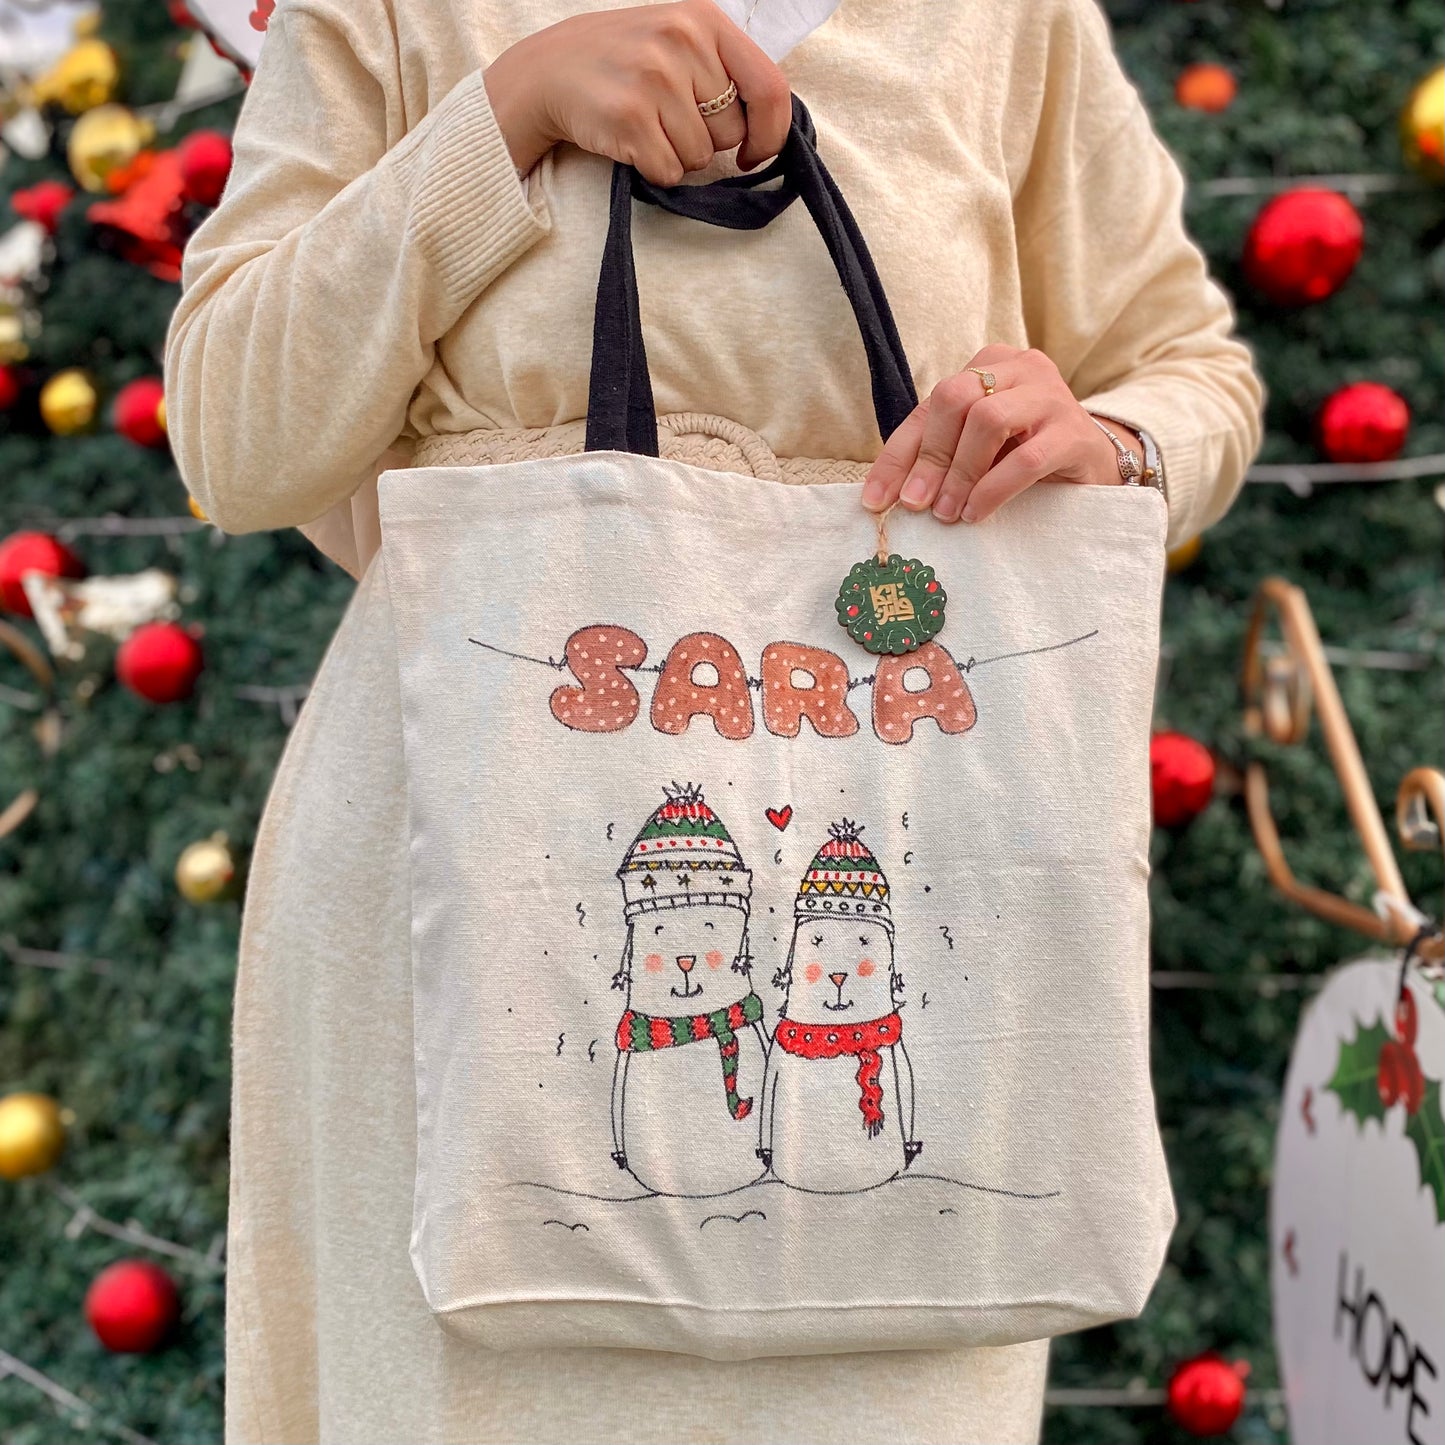 New Year Tote Bag "Couple of snow"